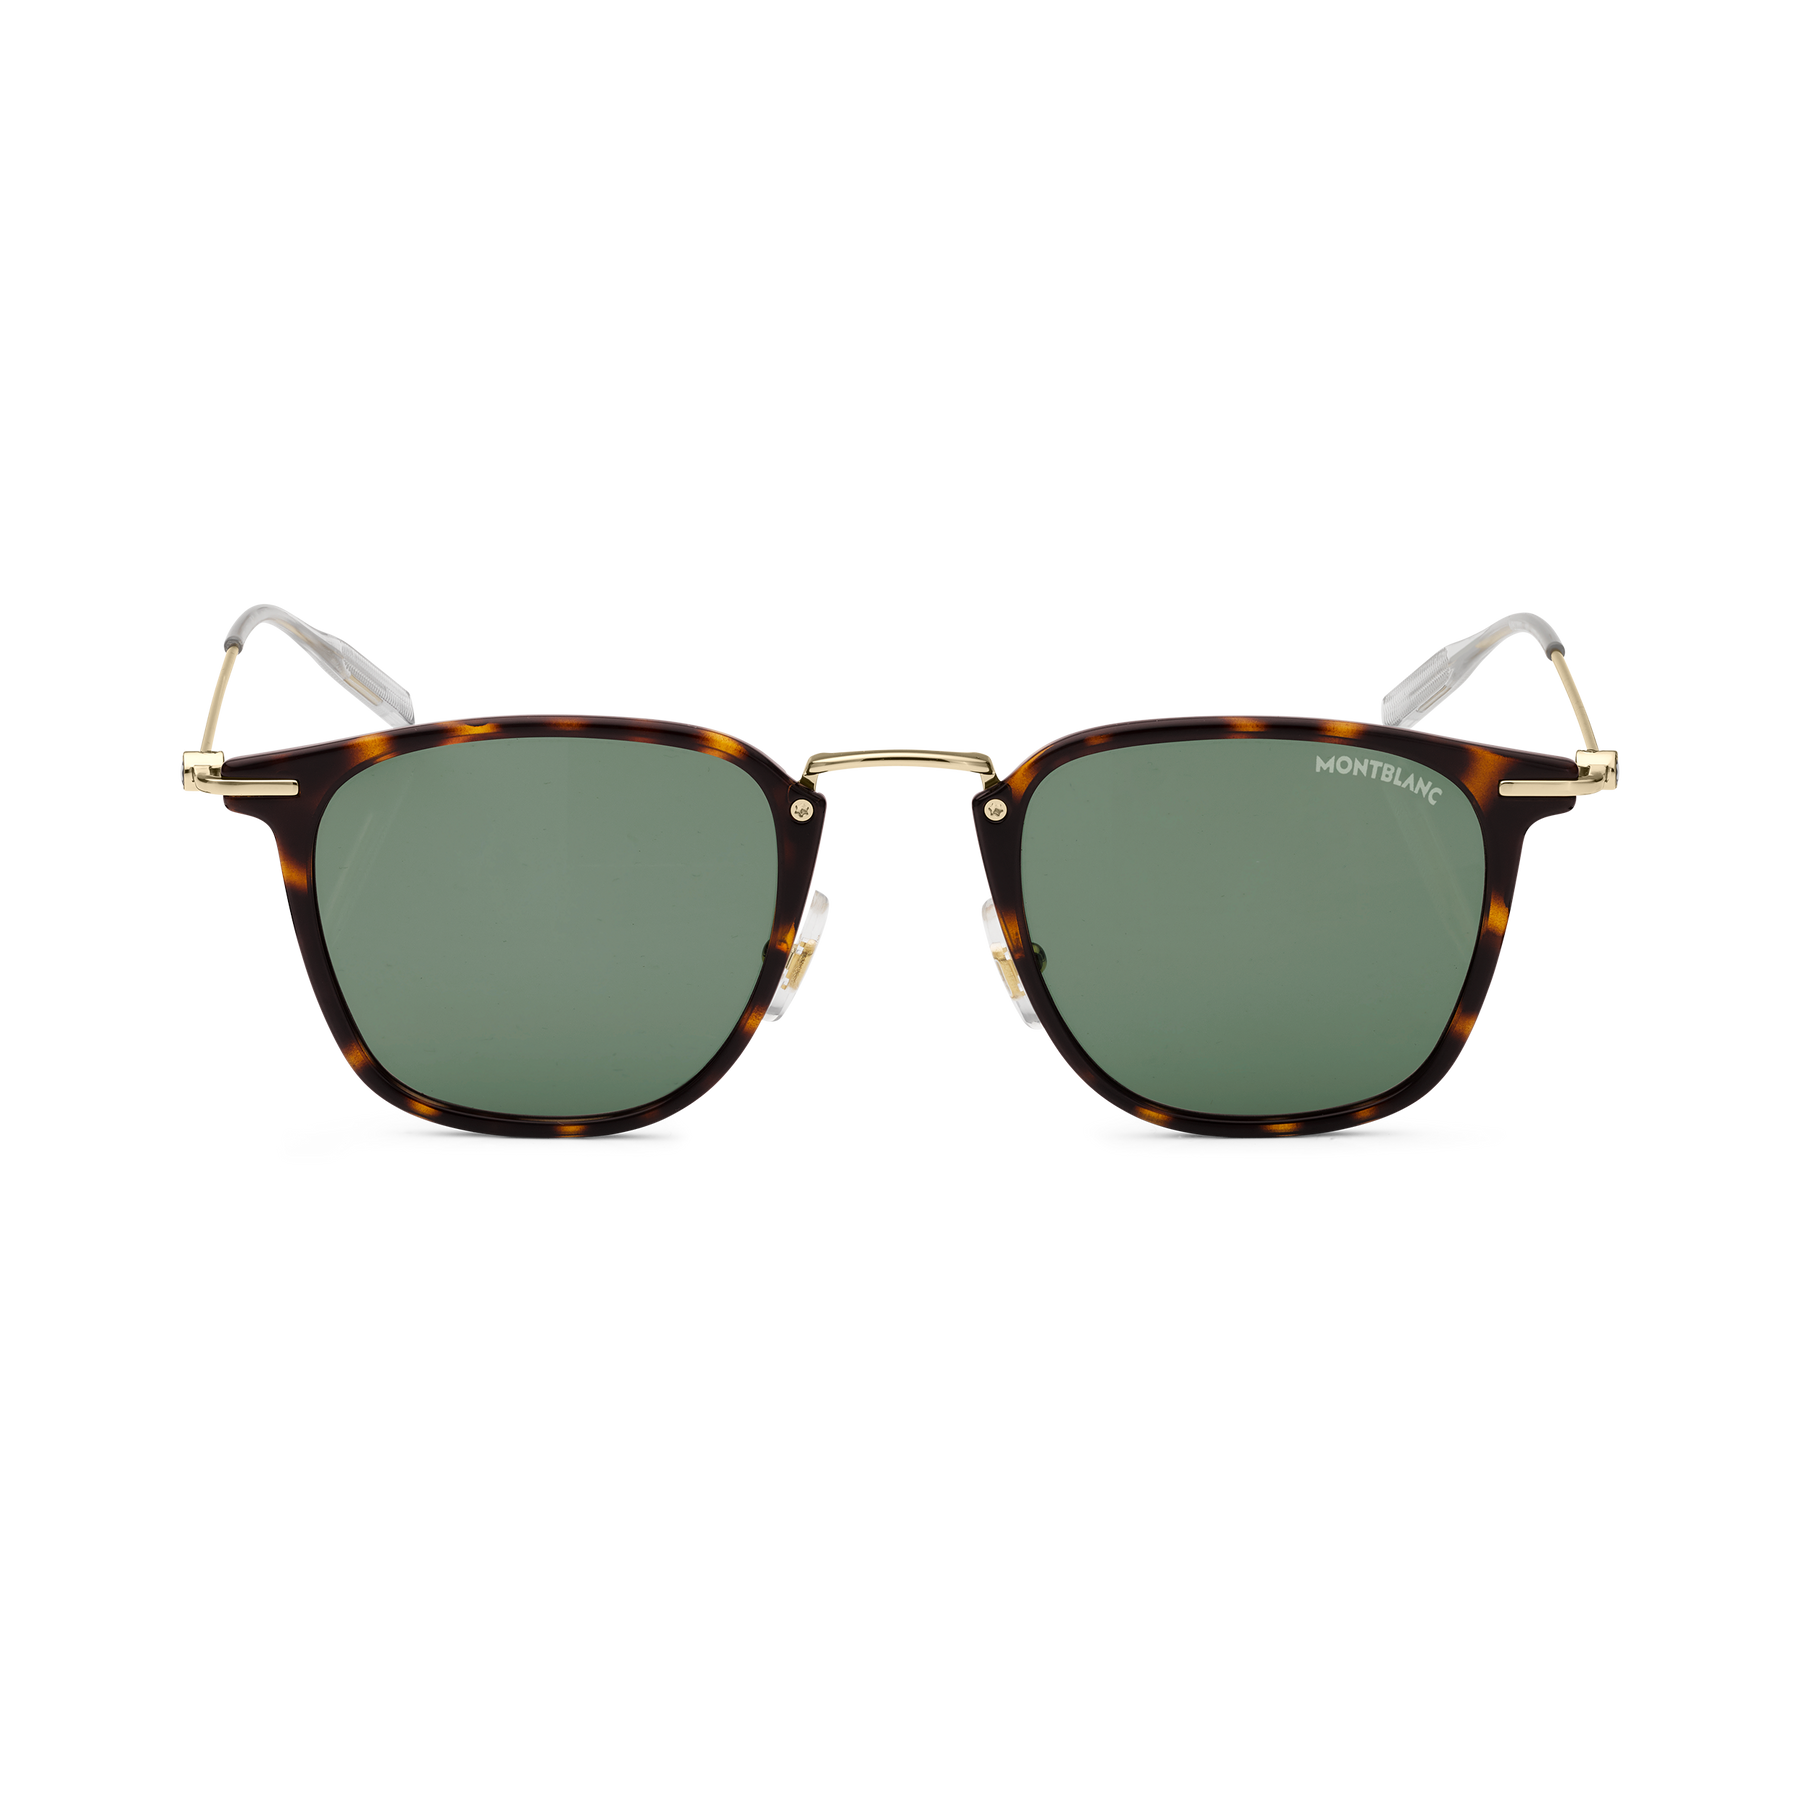 Round Sunglasses with Havana Colored Injected Frame